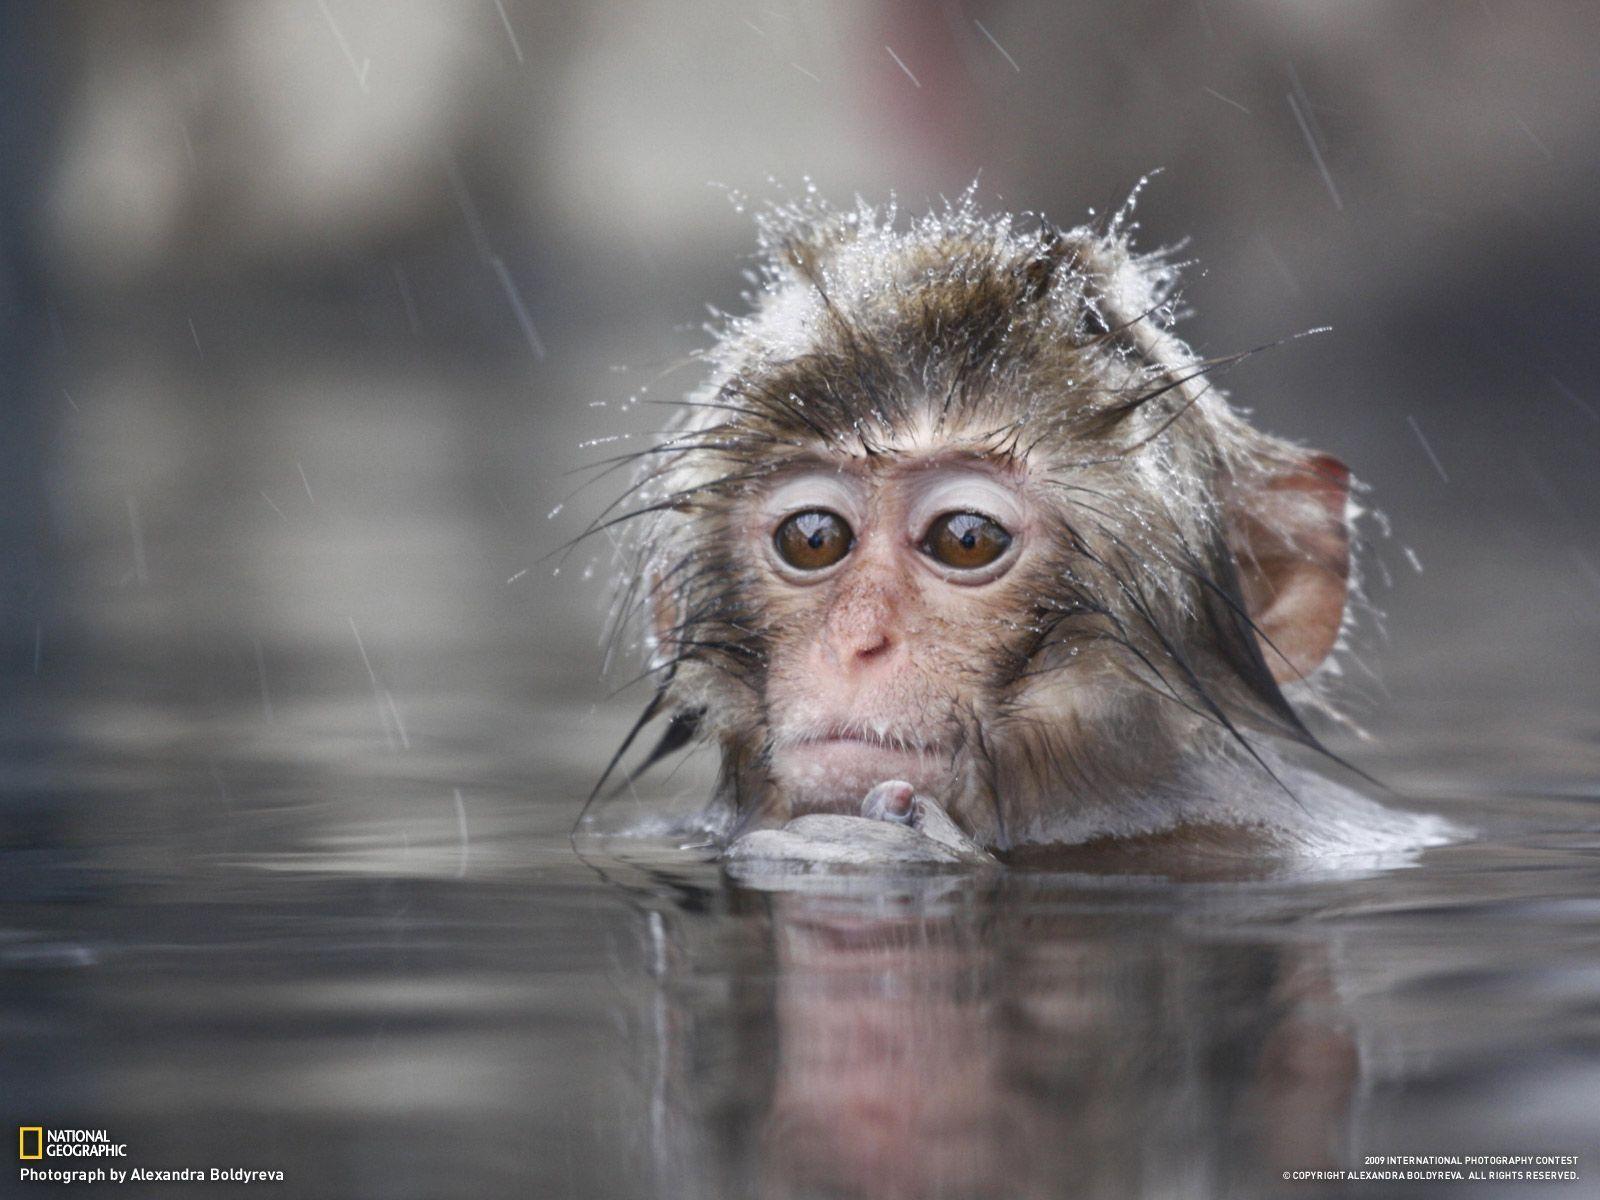 top Most Cute And Beautiful Monkey Wallpaper In HD new. HD